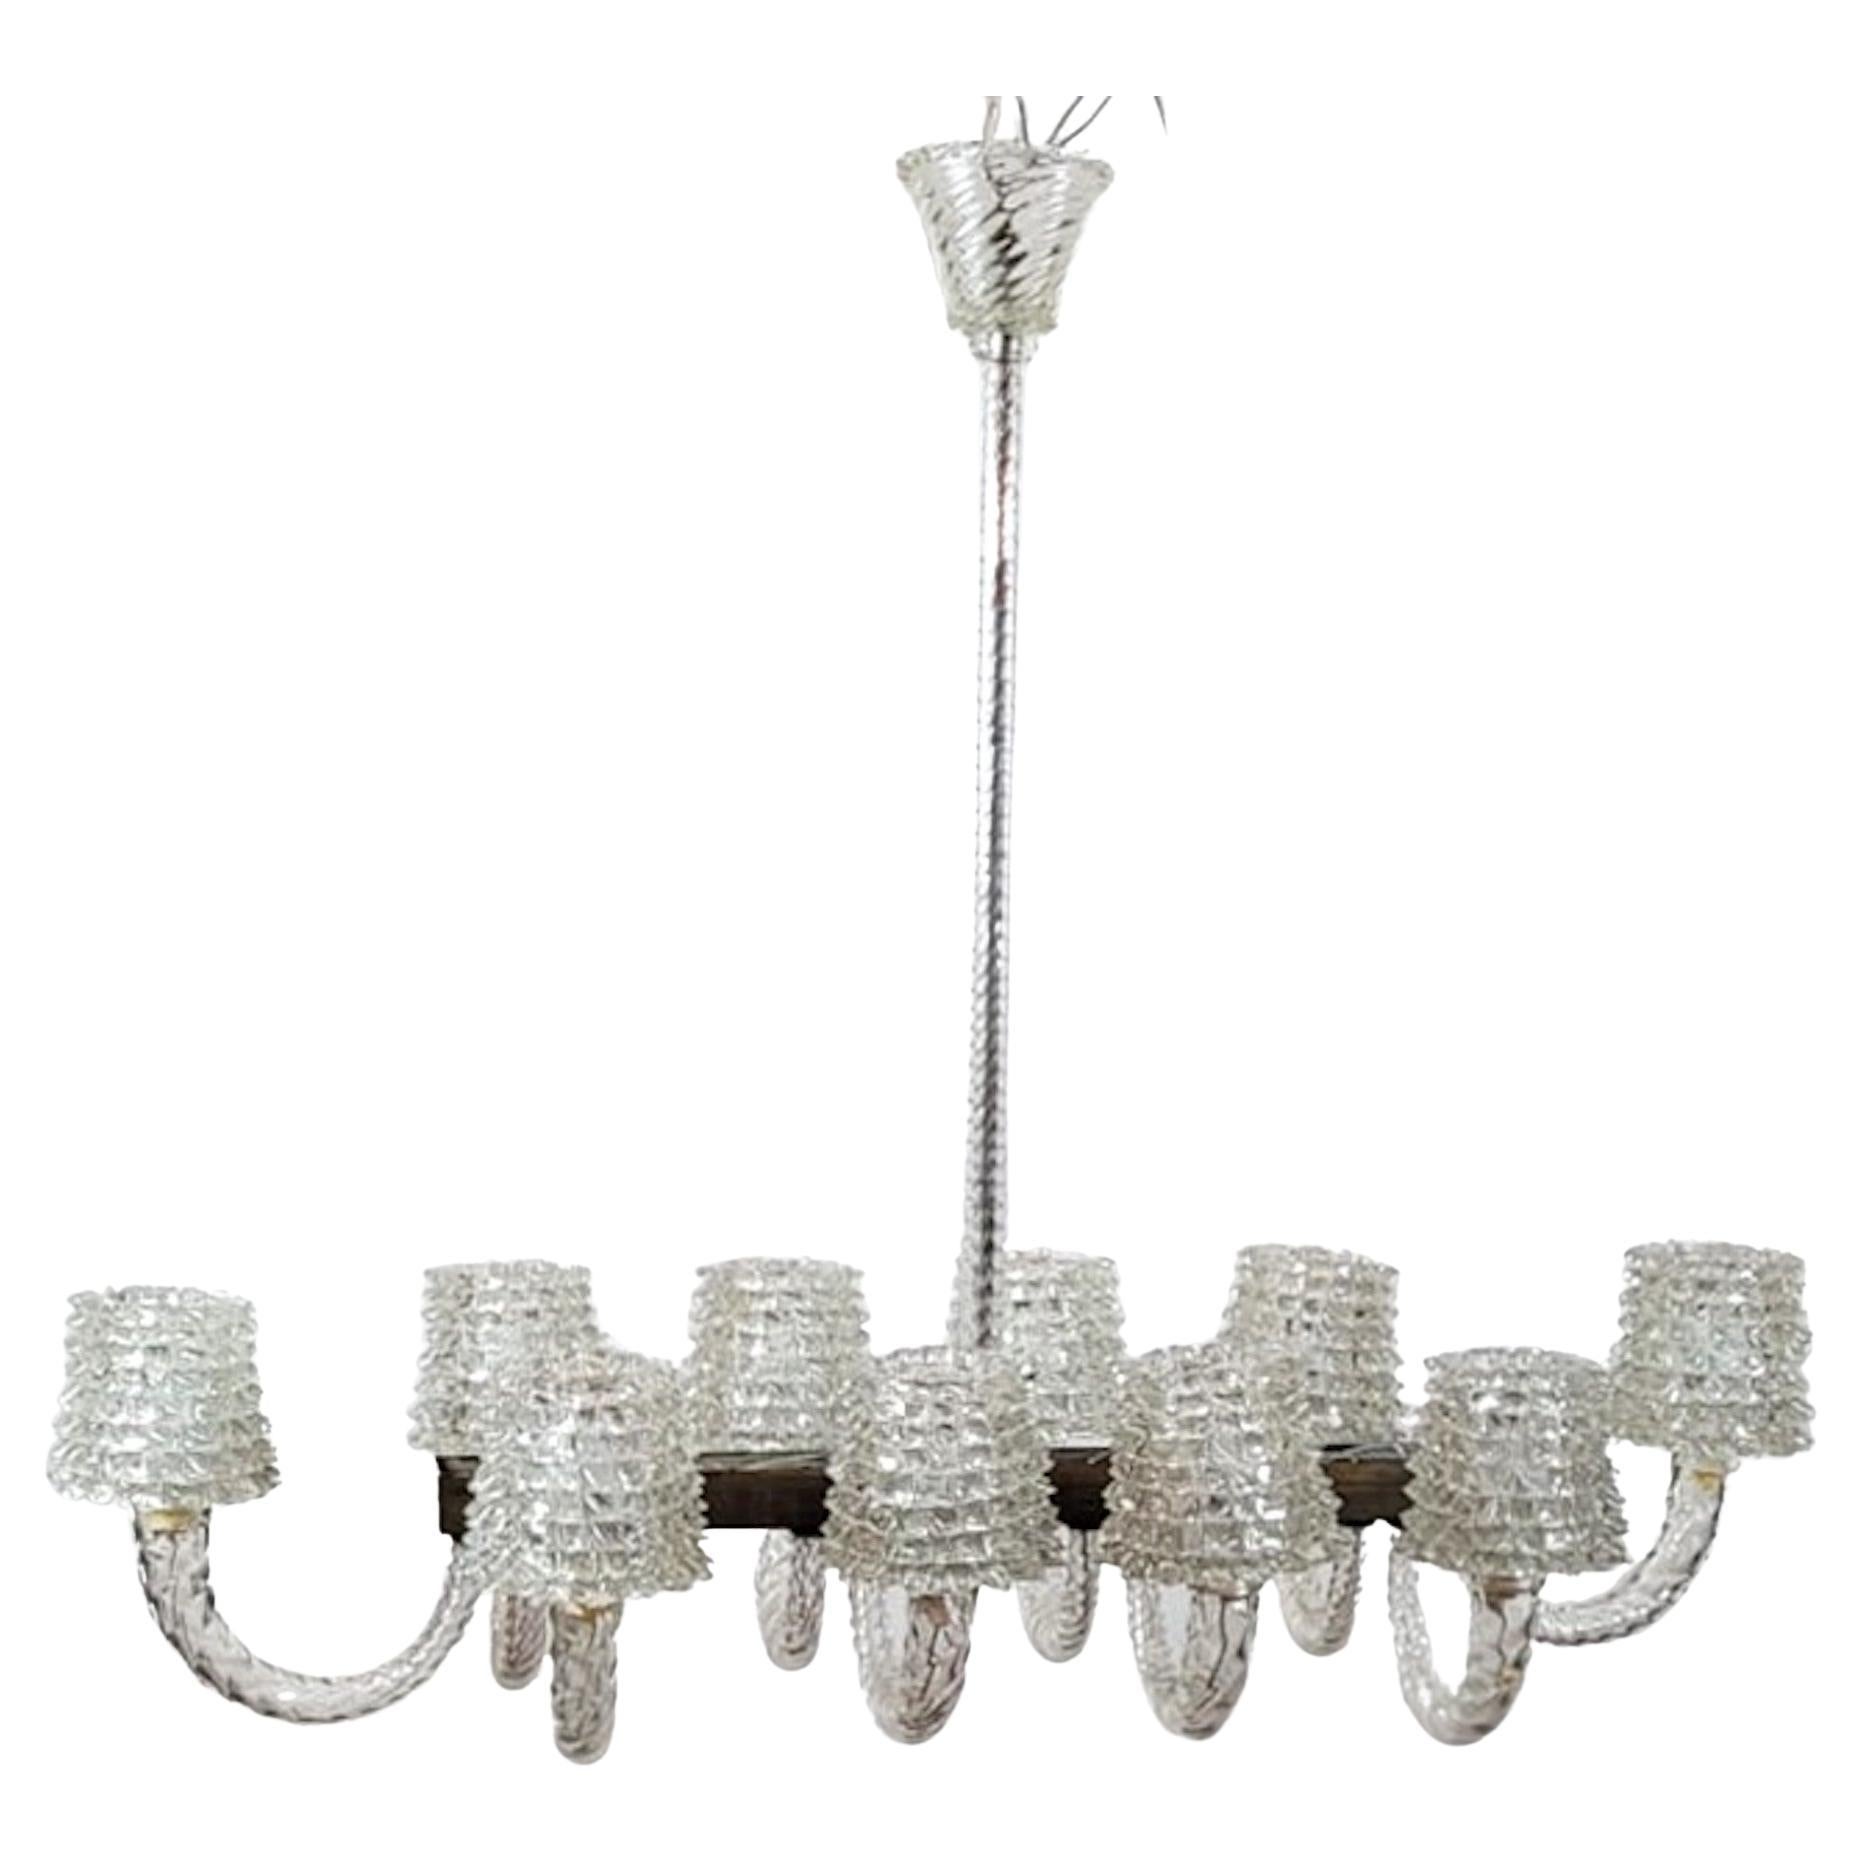 Large Barovier And Toso Chandelier - Murano - 10 Sconces